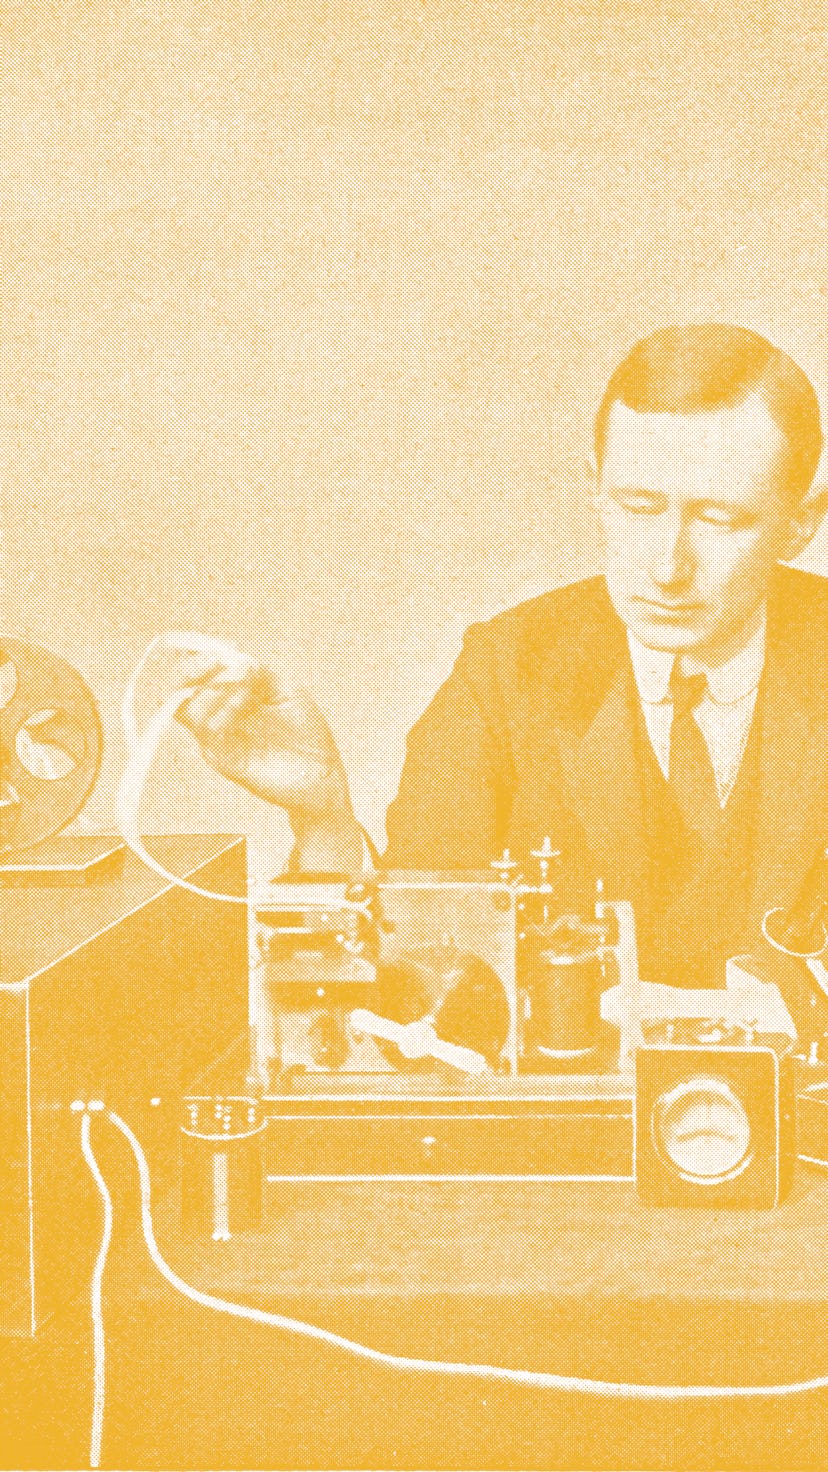 Marconi in front of his receiving device for wireless telegraphy, vintage engraved illustration. Fro...